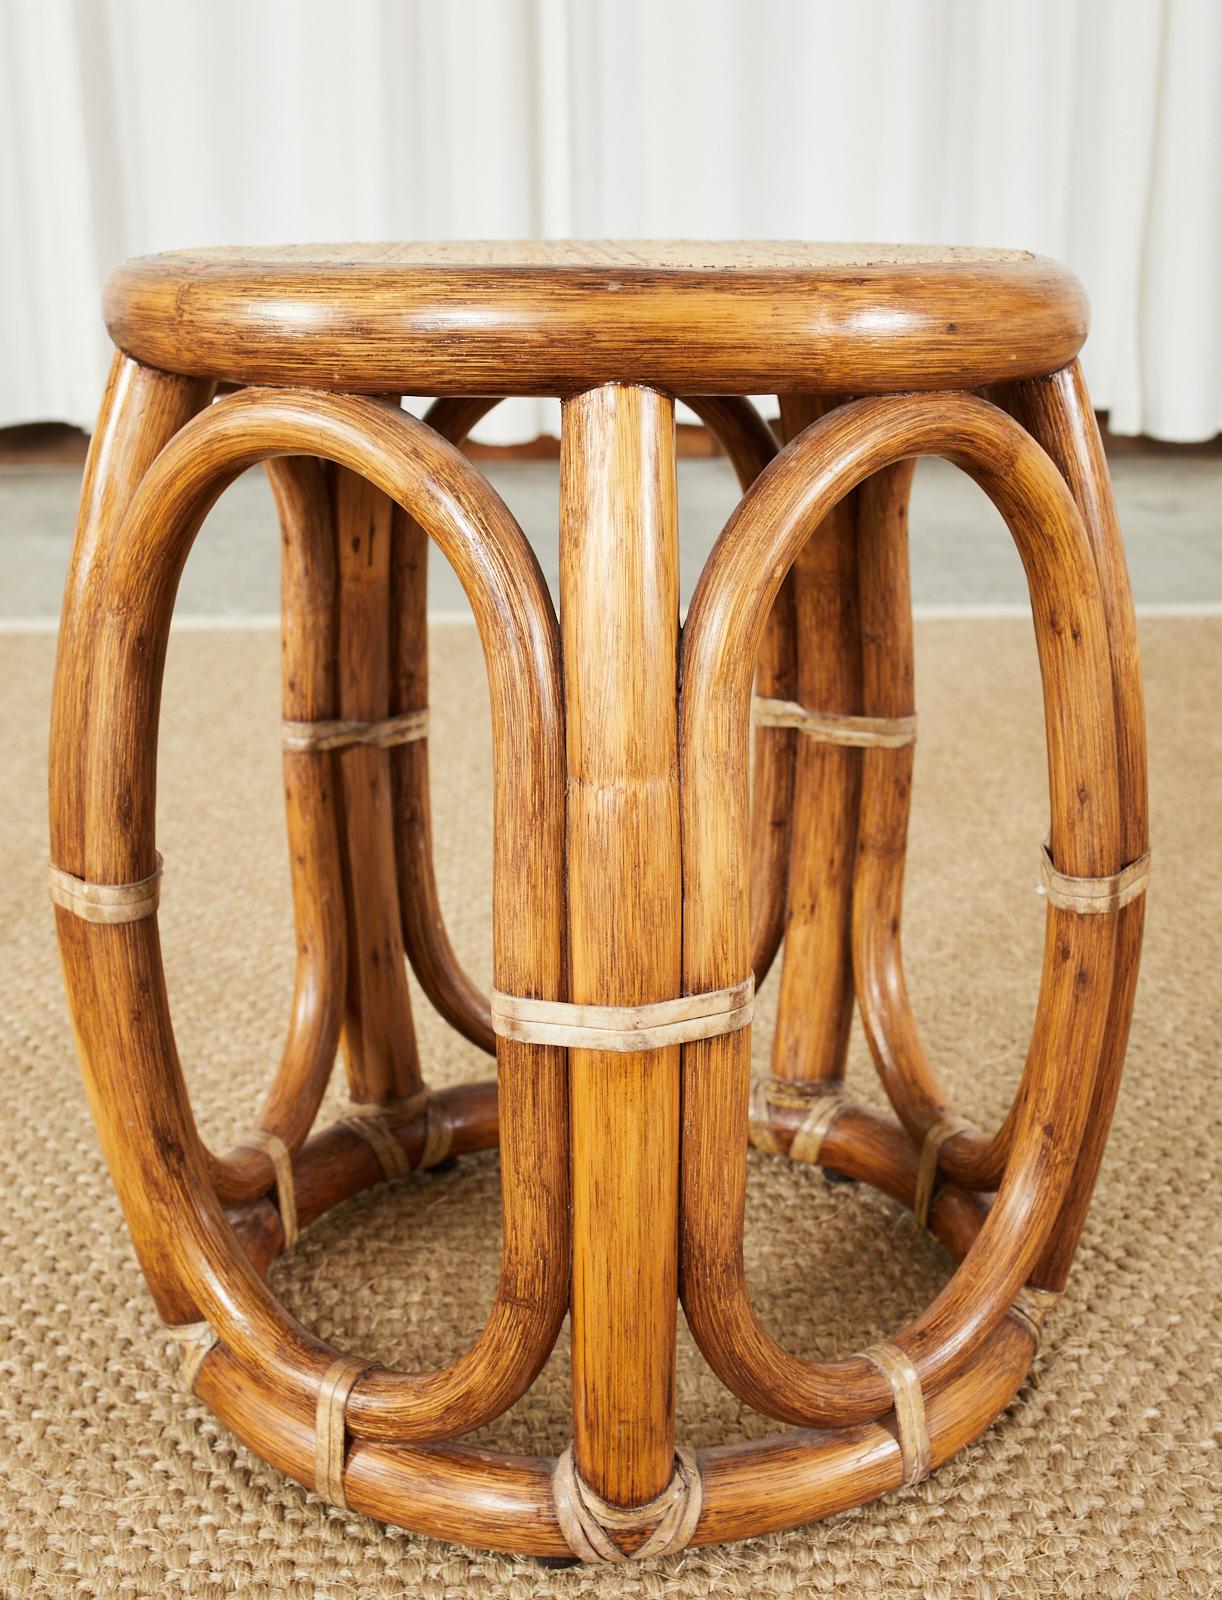 Hand-Crafted McGuire Rattan Taboret Drum Stool or Drink Table